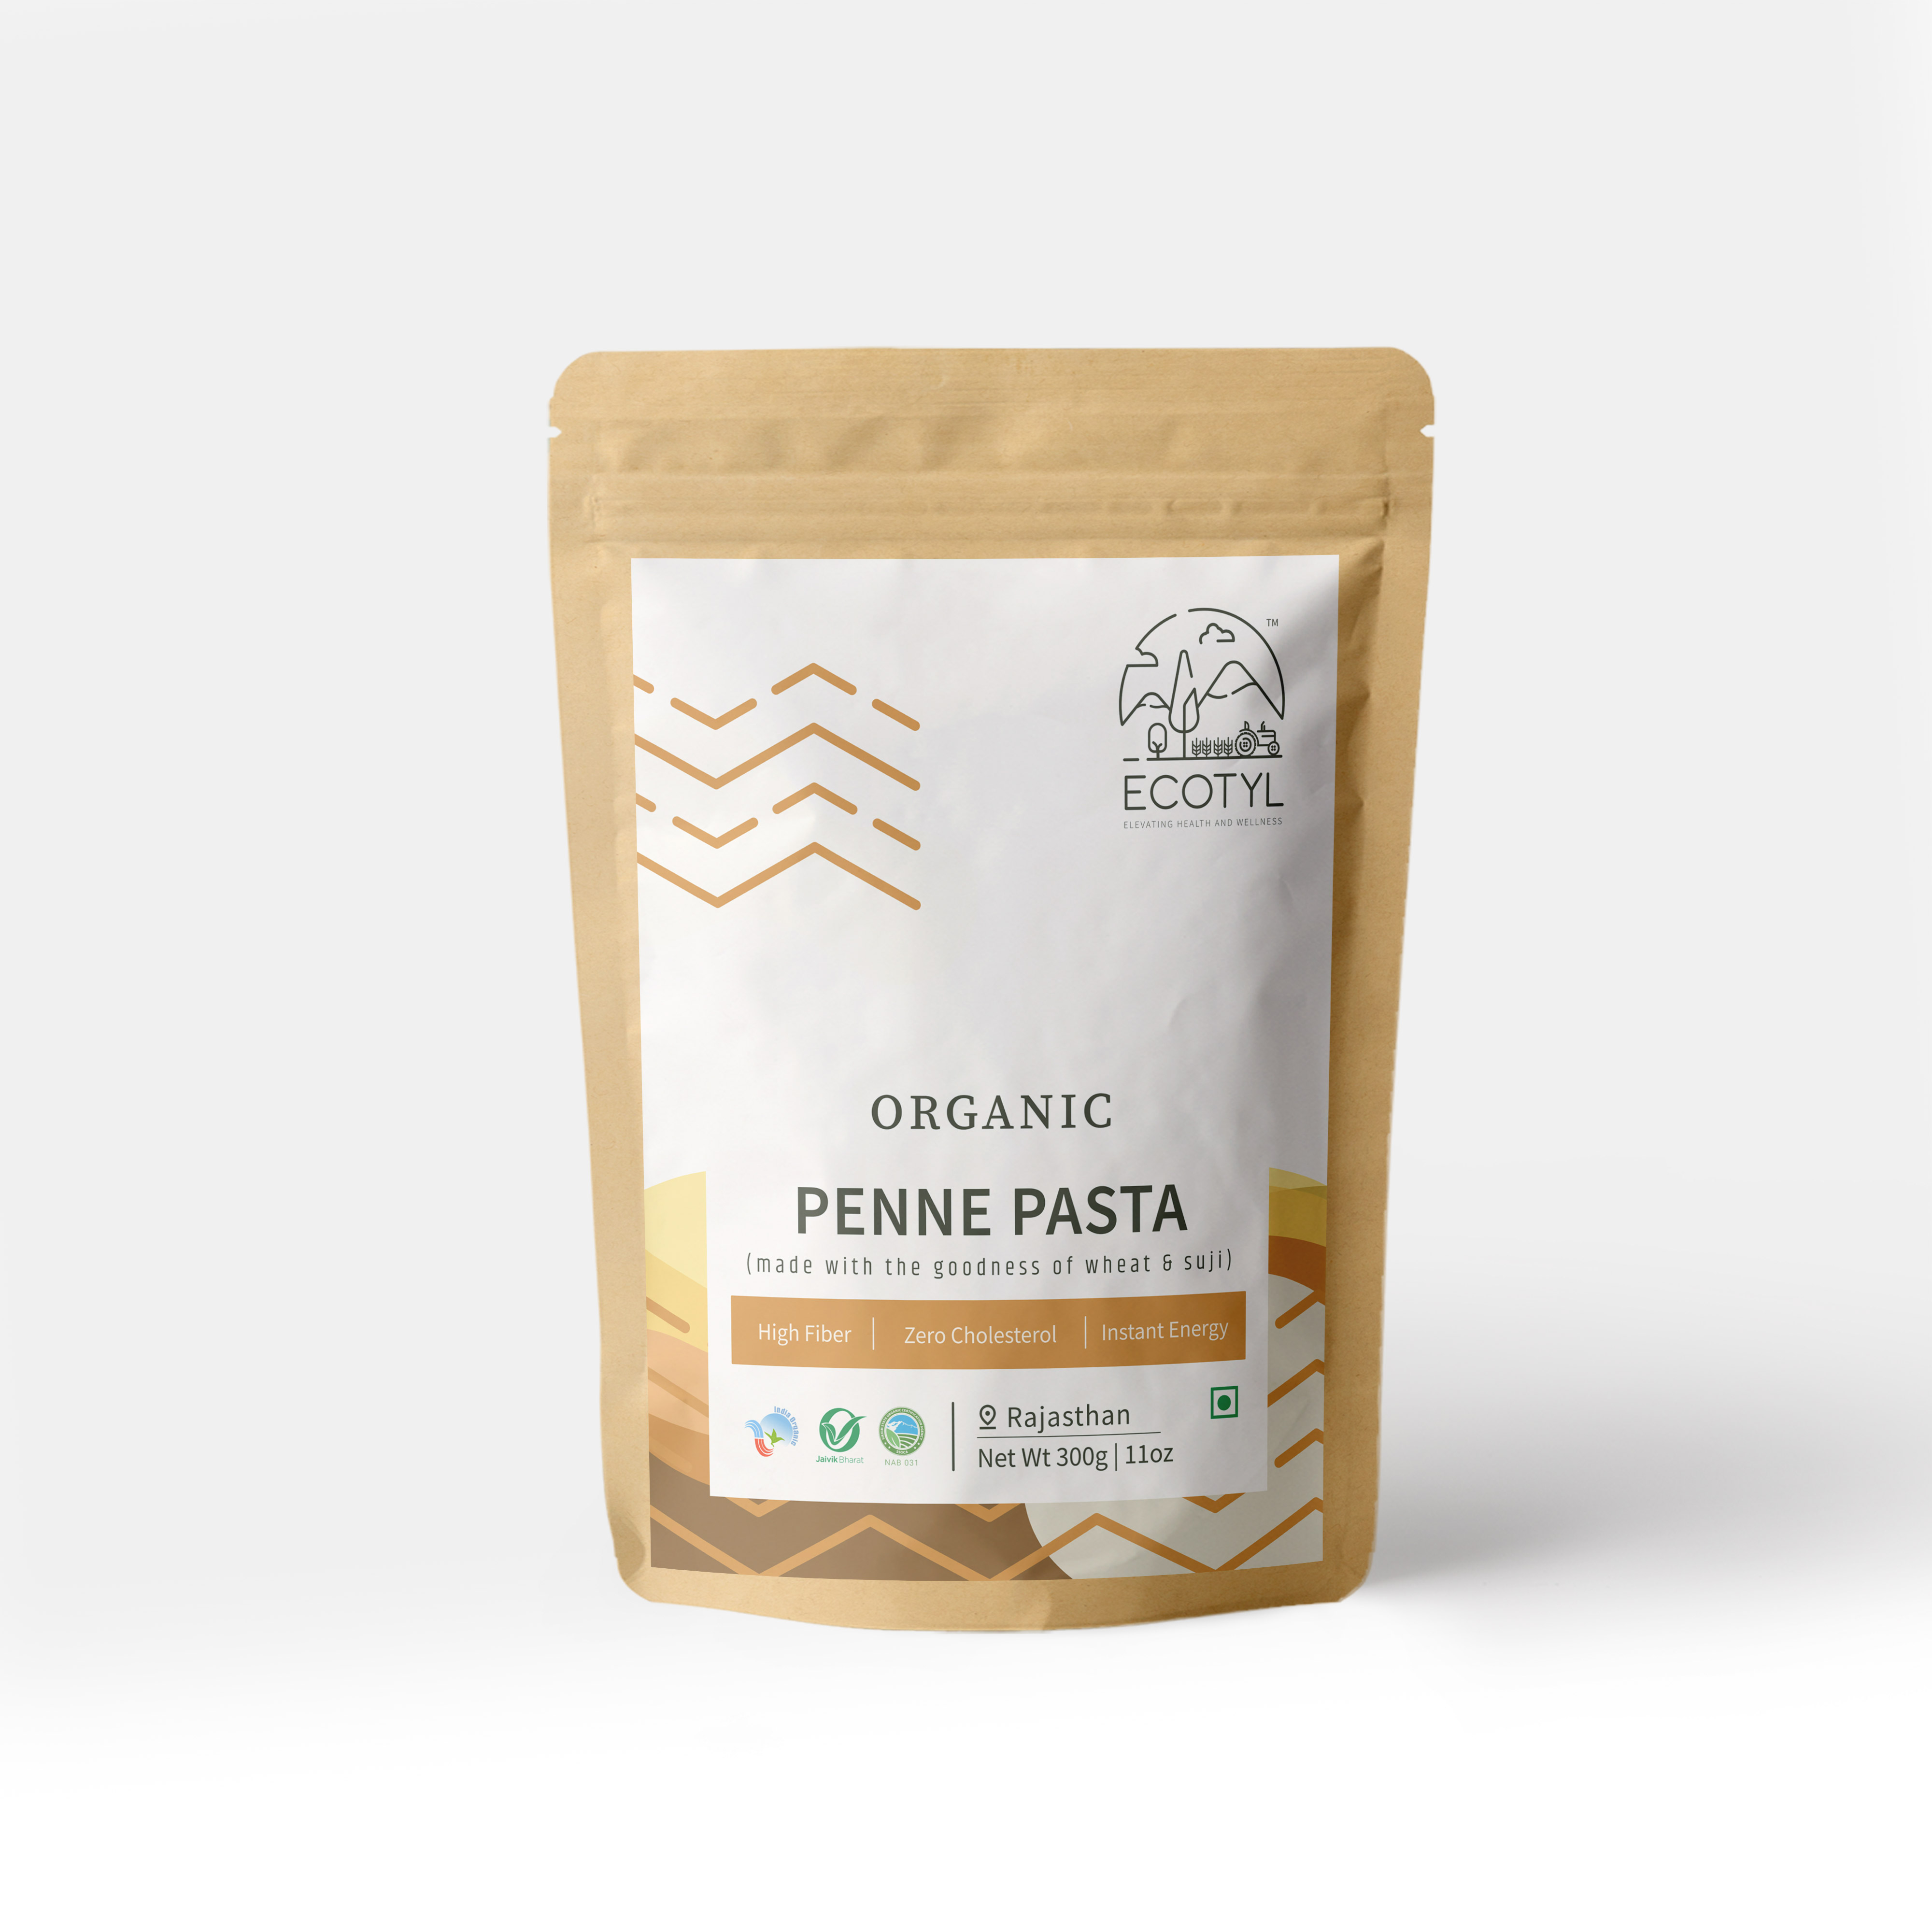 Buy Ecotyl Organic Pasta (Penne) - 300 g at Best Price Online